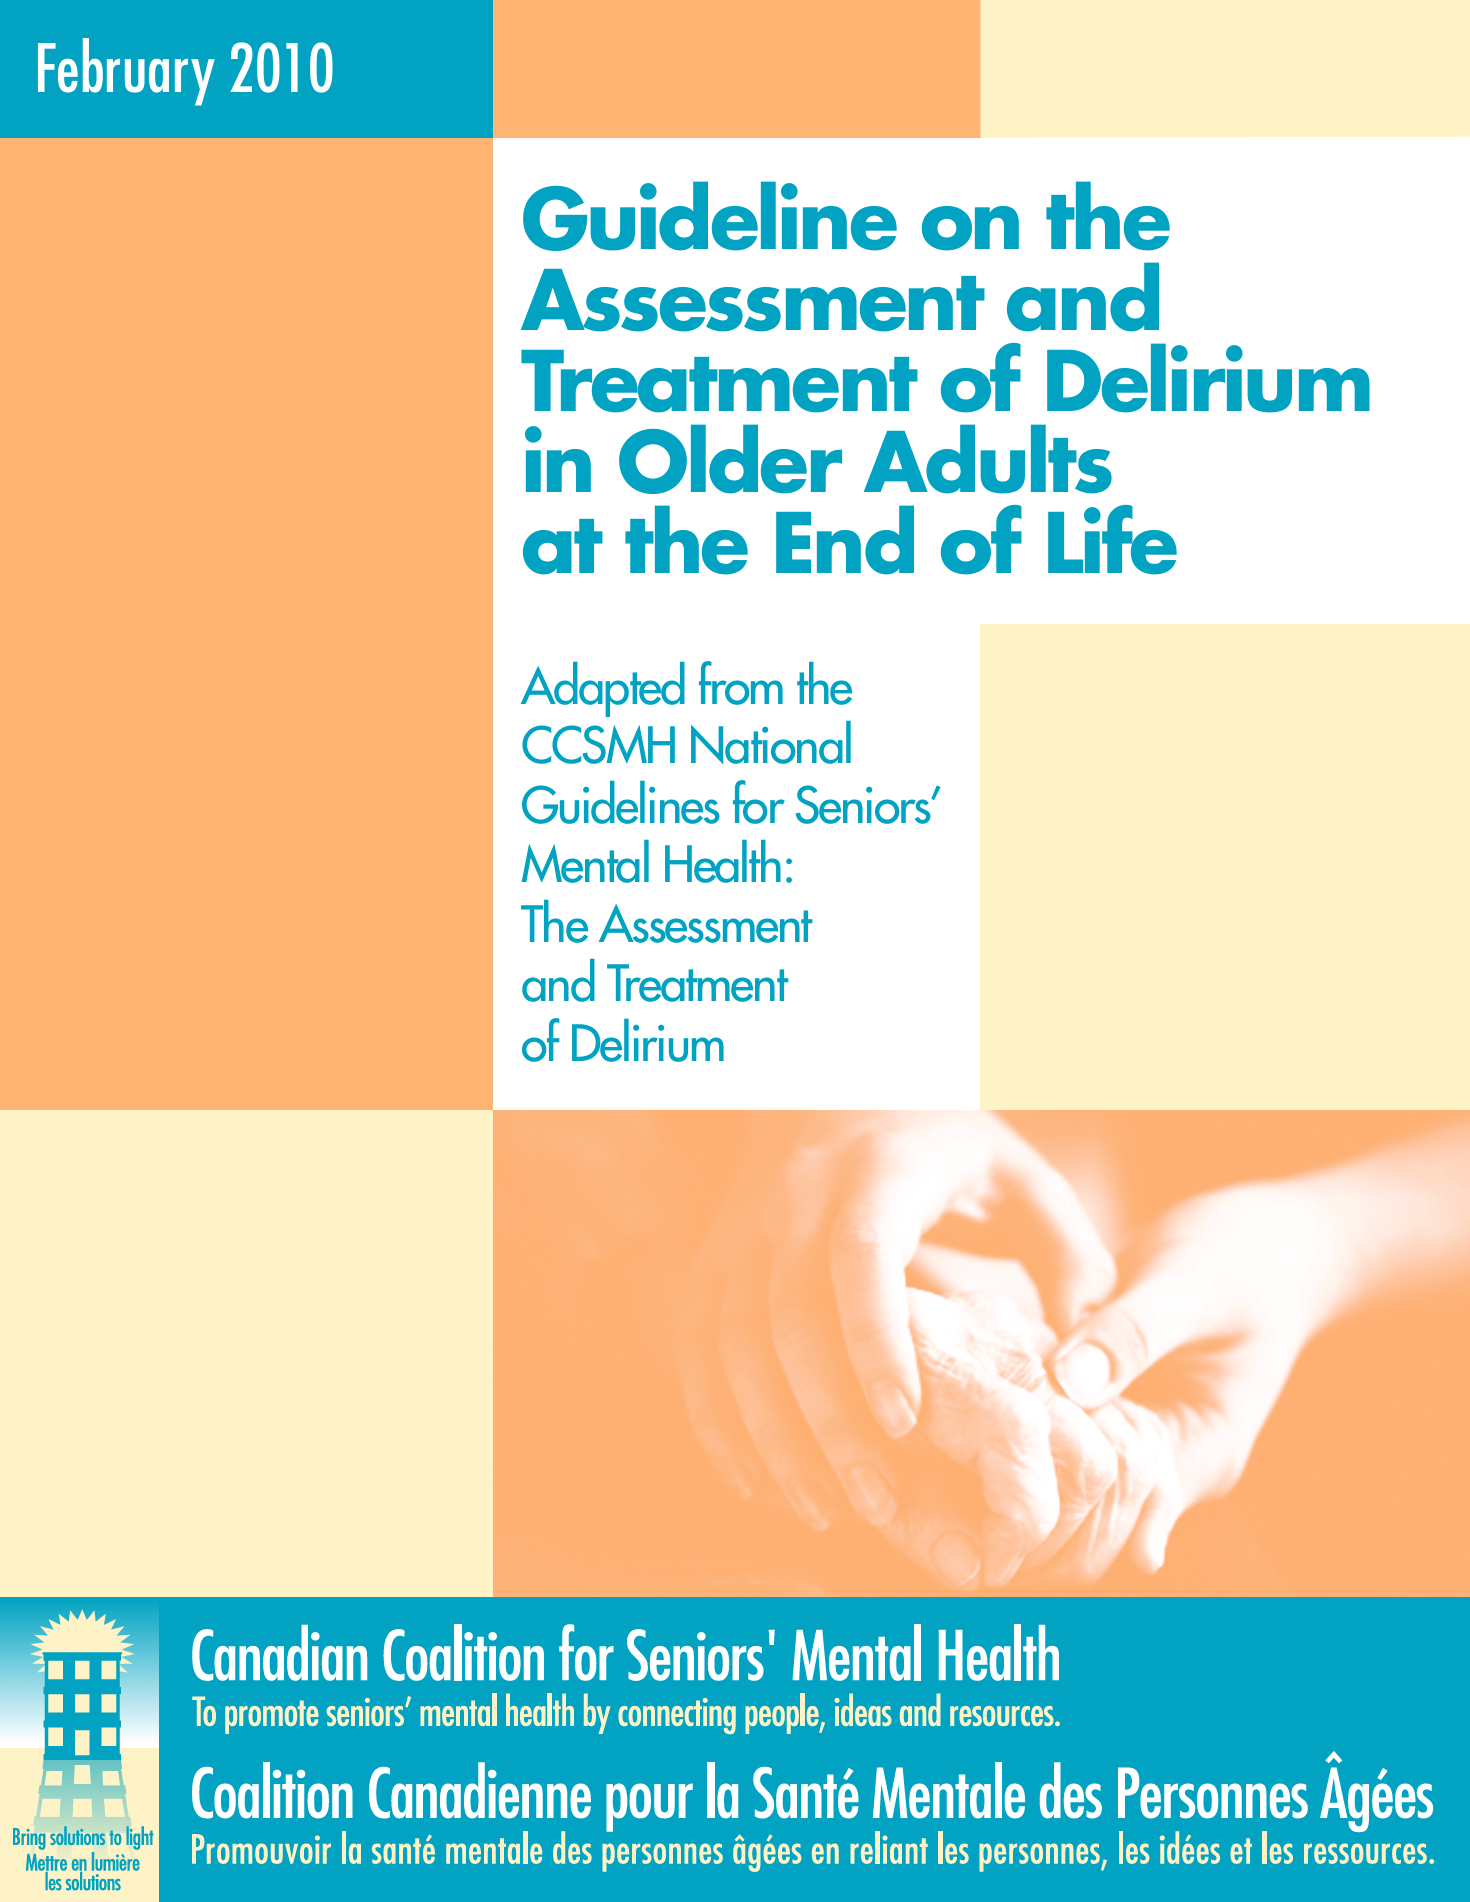 Cover for the Guideline on the Assessment and Treatment of Delirium with a soft image of a caretaker holding the hand of an older adult.